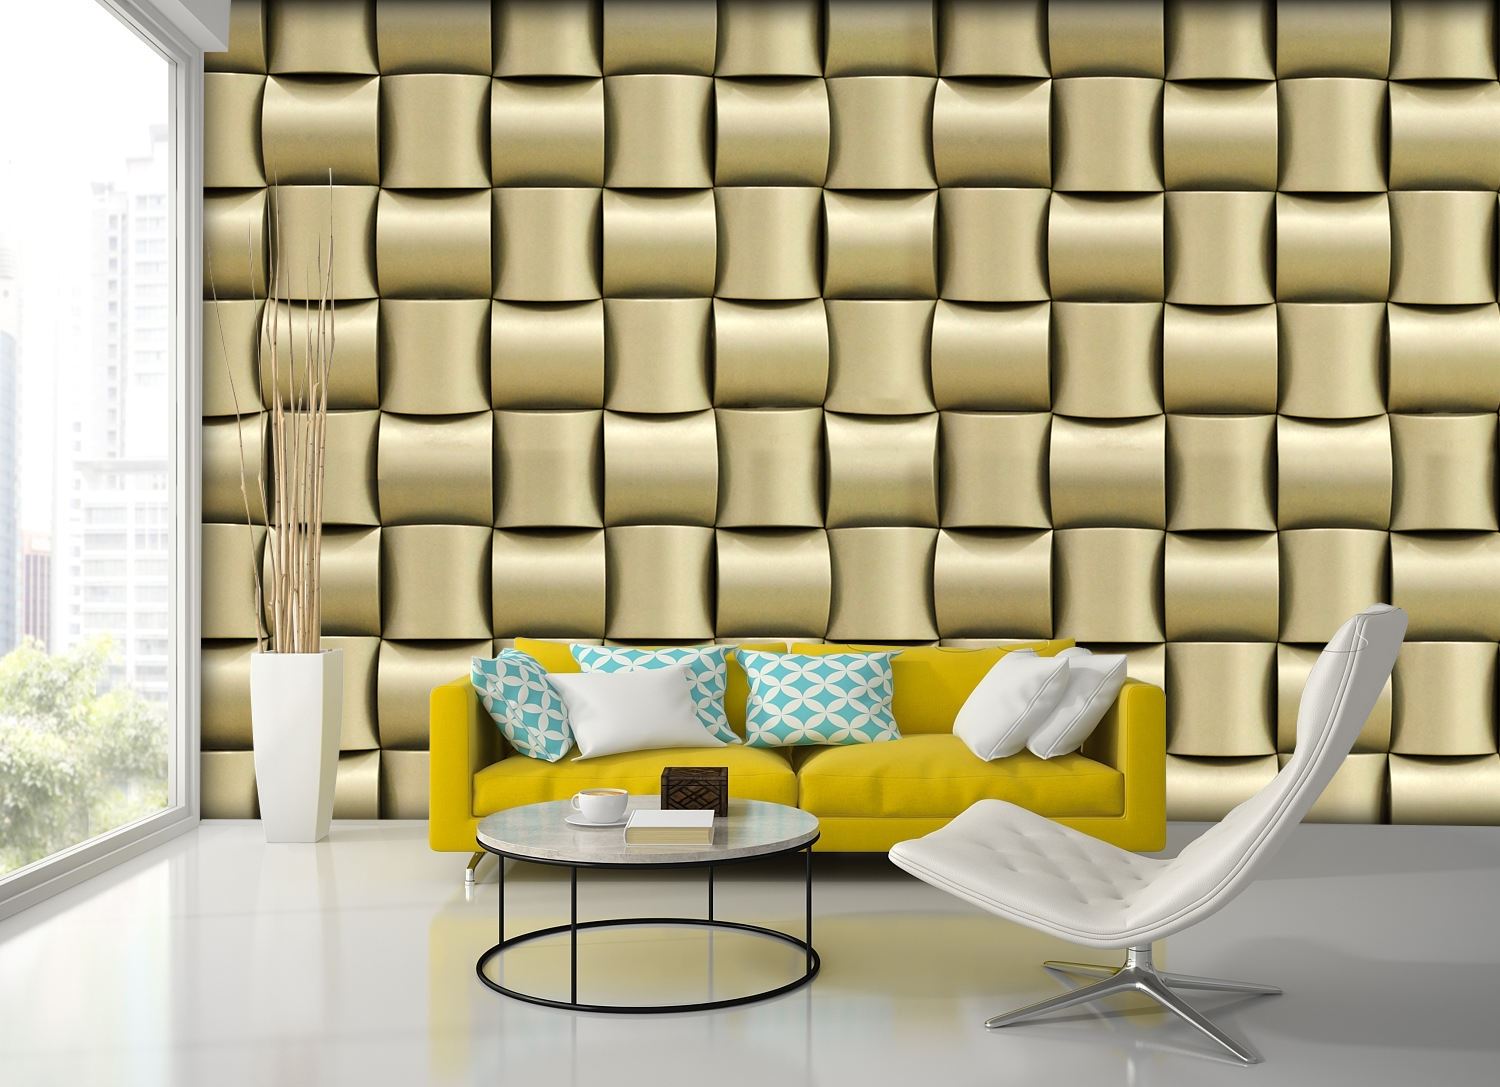 Gratex Best Quality Designer Wallpaper | Digital Wall Picture|  Wallcoverings | Murals Wallpaper Decor Design | Wallpapers Online Store |  Painting | Digital Wall Picture - ZARA Collection